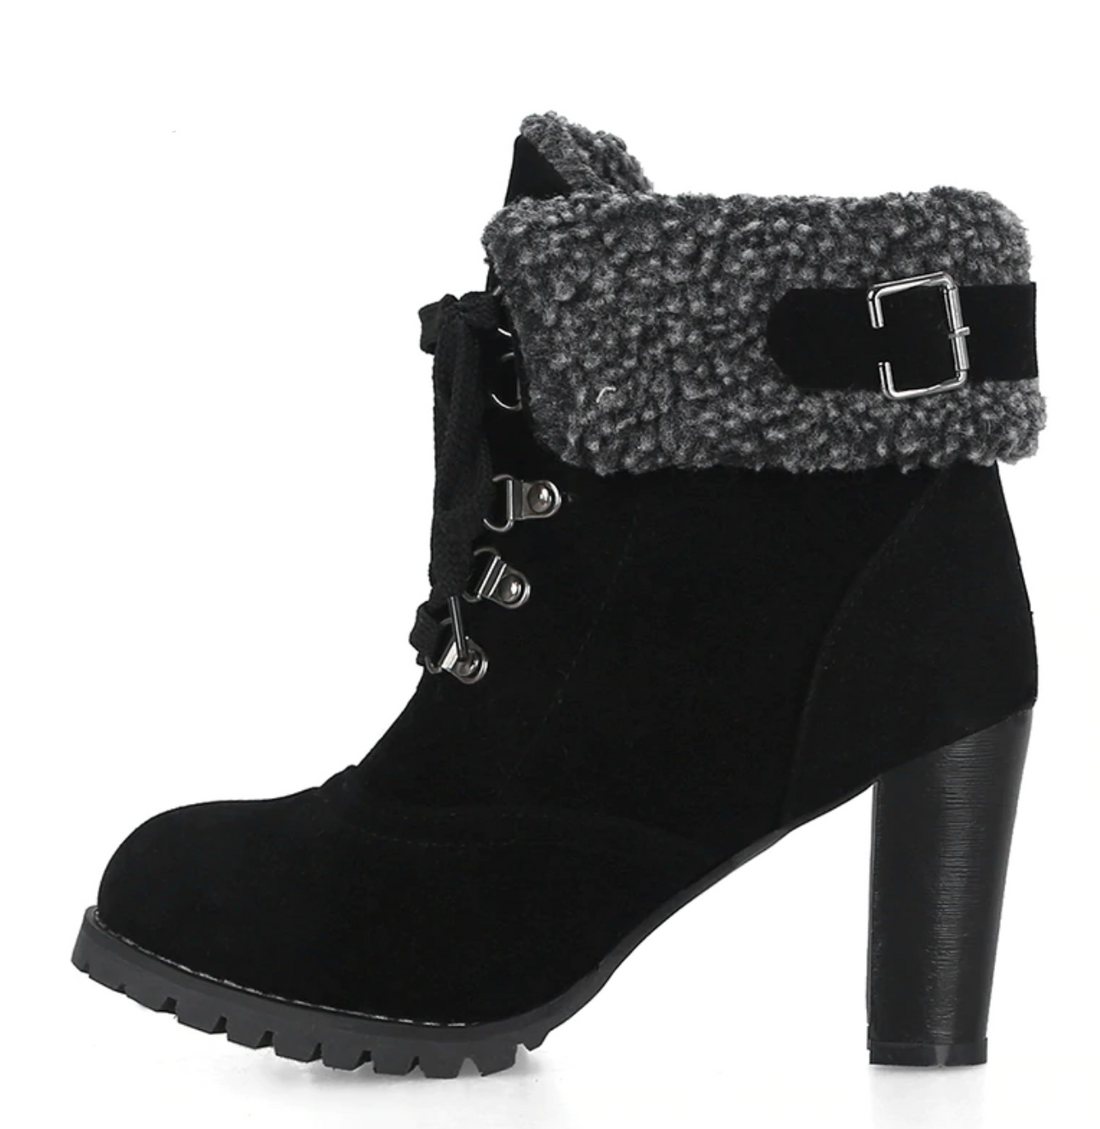 Women's Autumn/Winter Lace-Up Ankle Boots With Square Heels